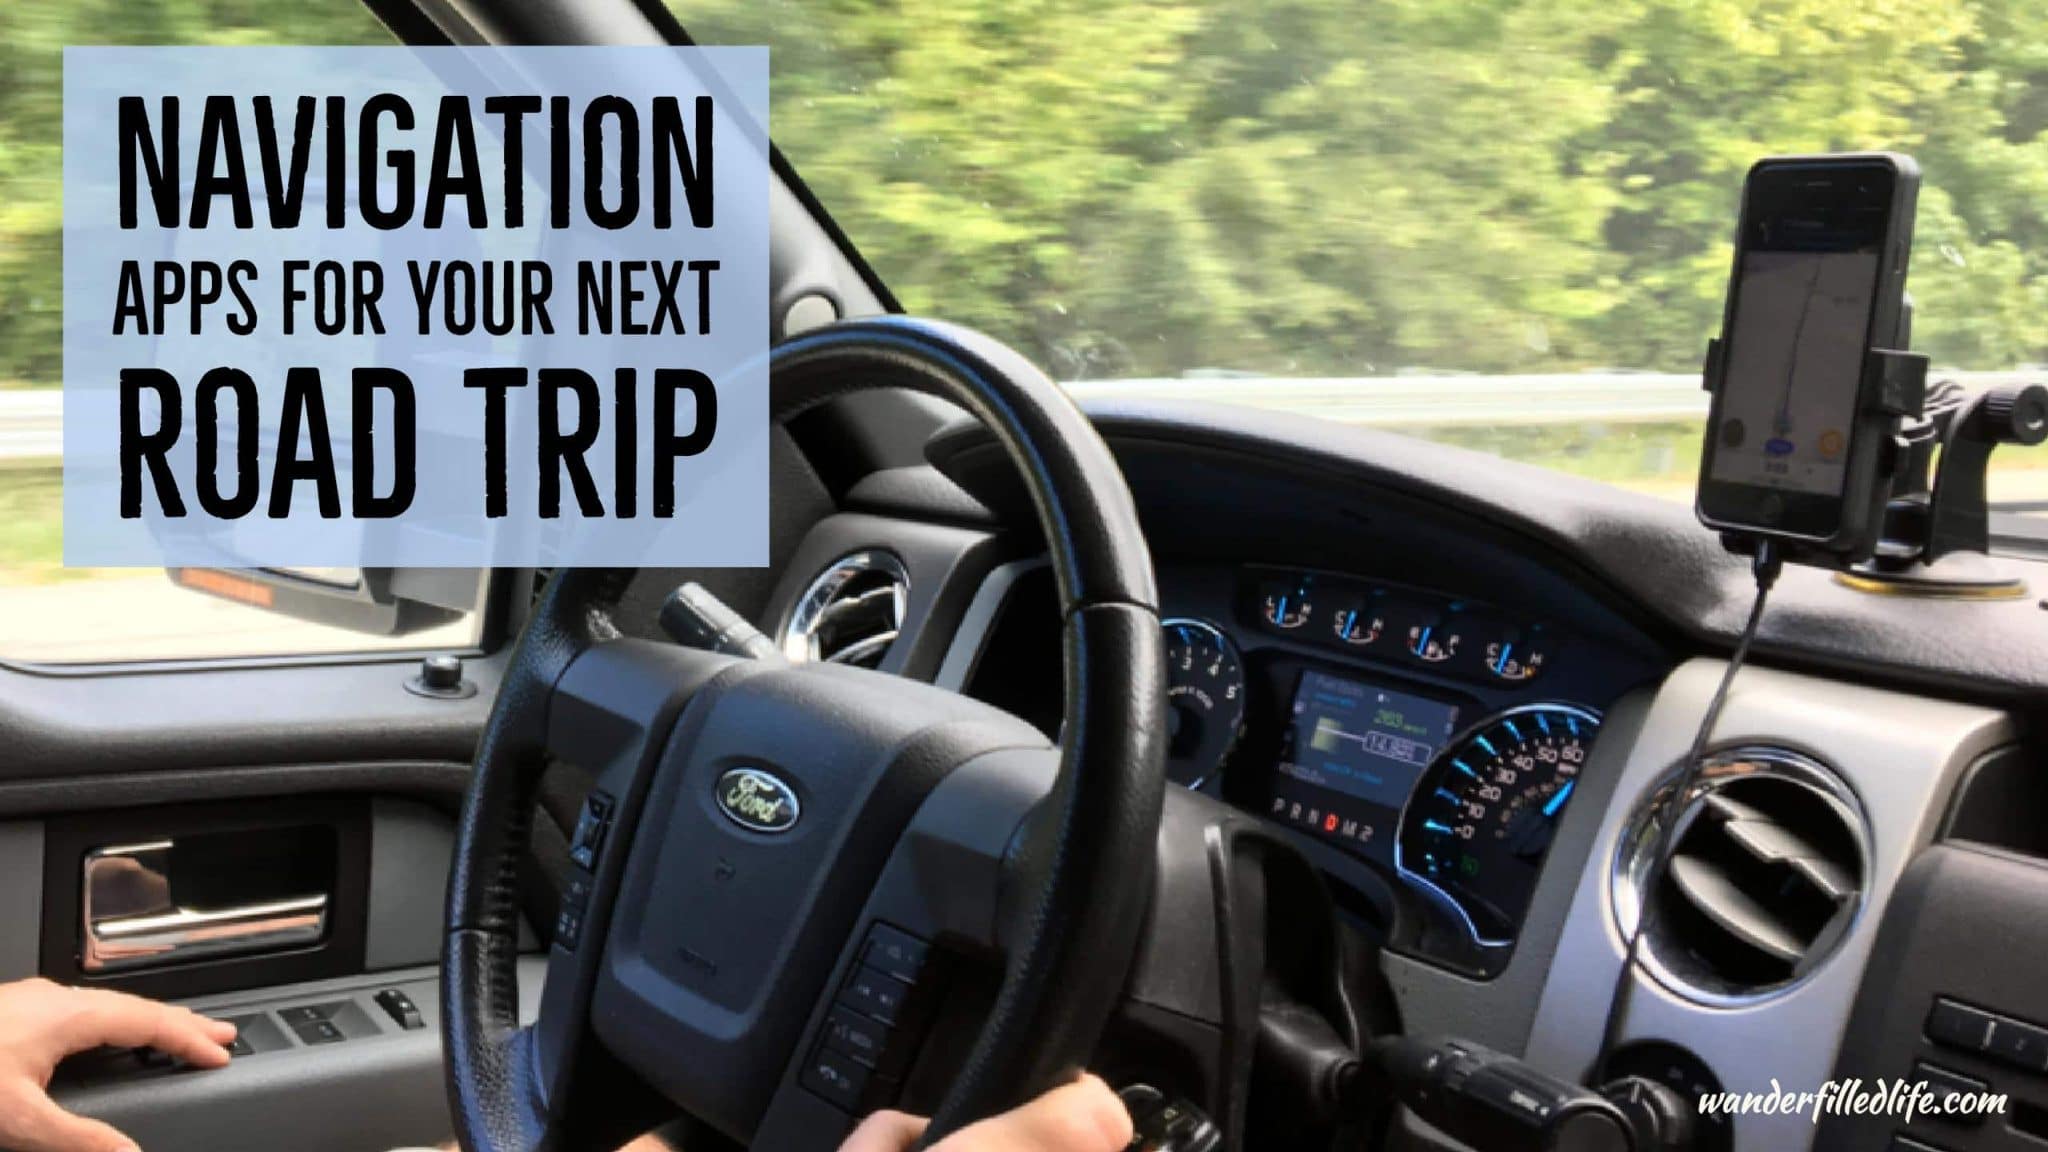 Navigation Apps for Your Next Road Trip